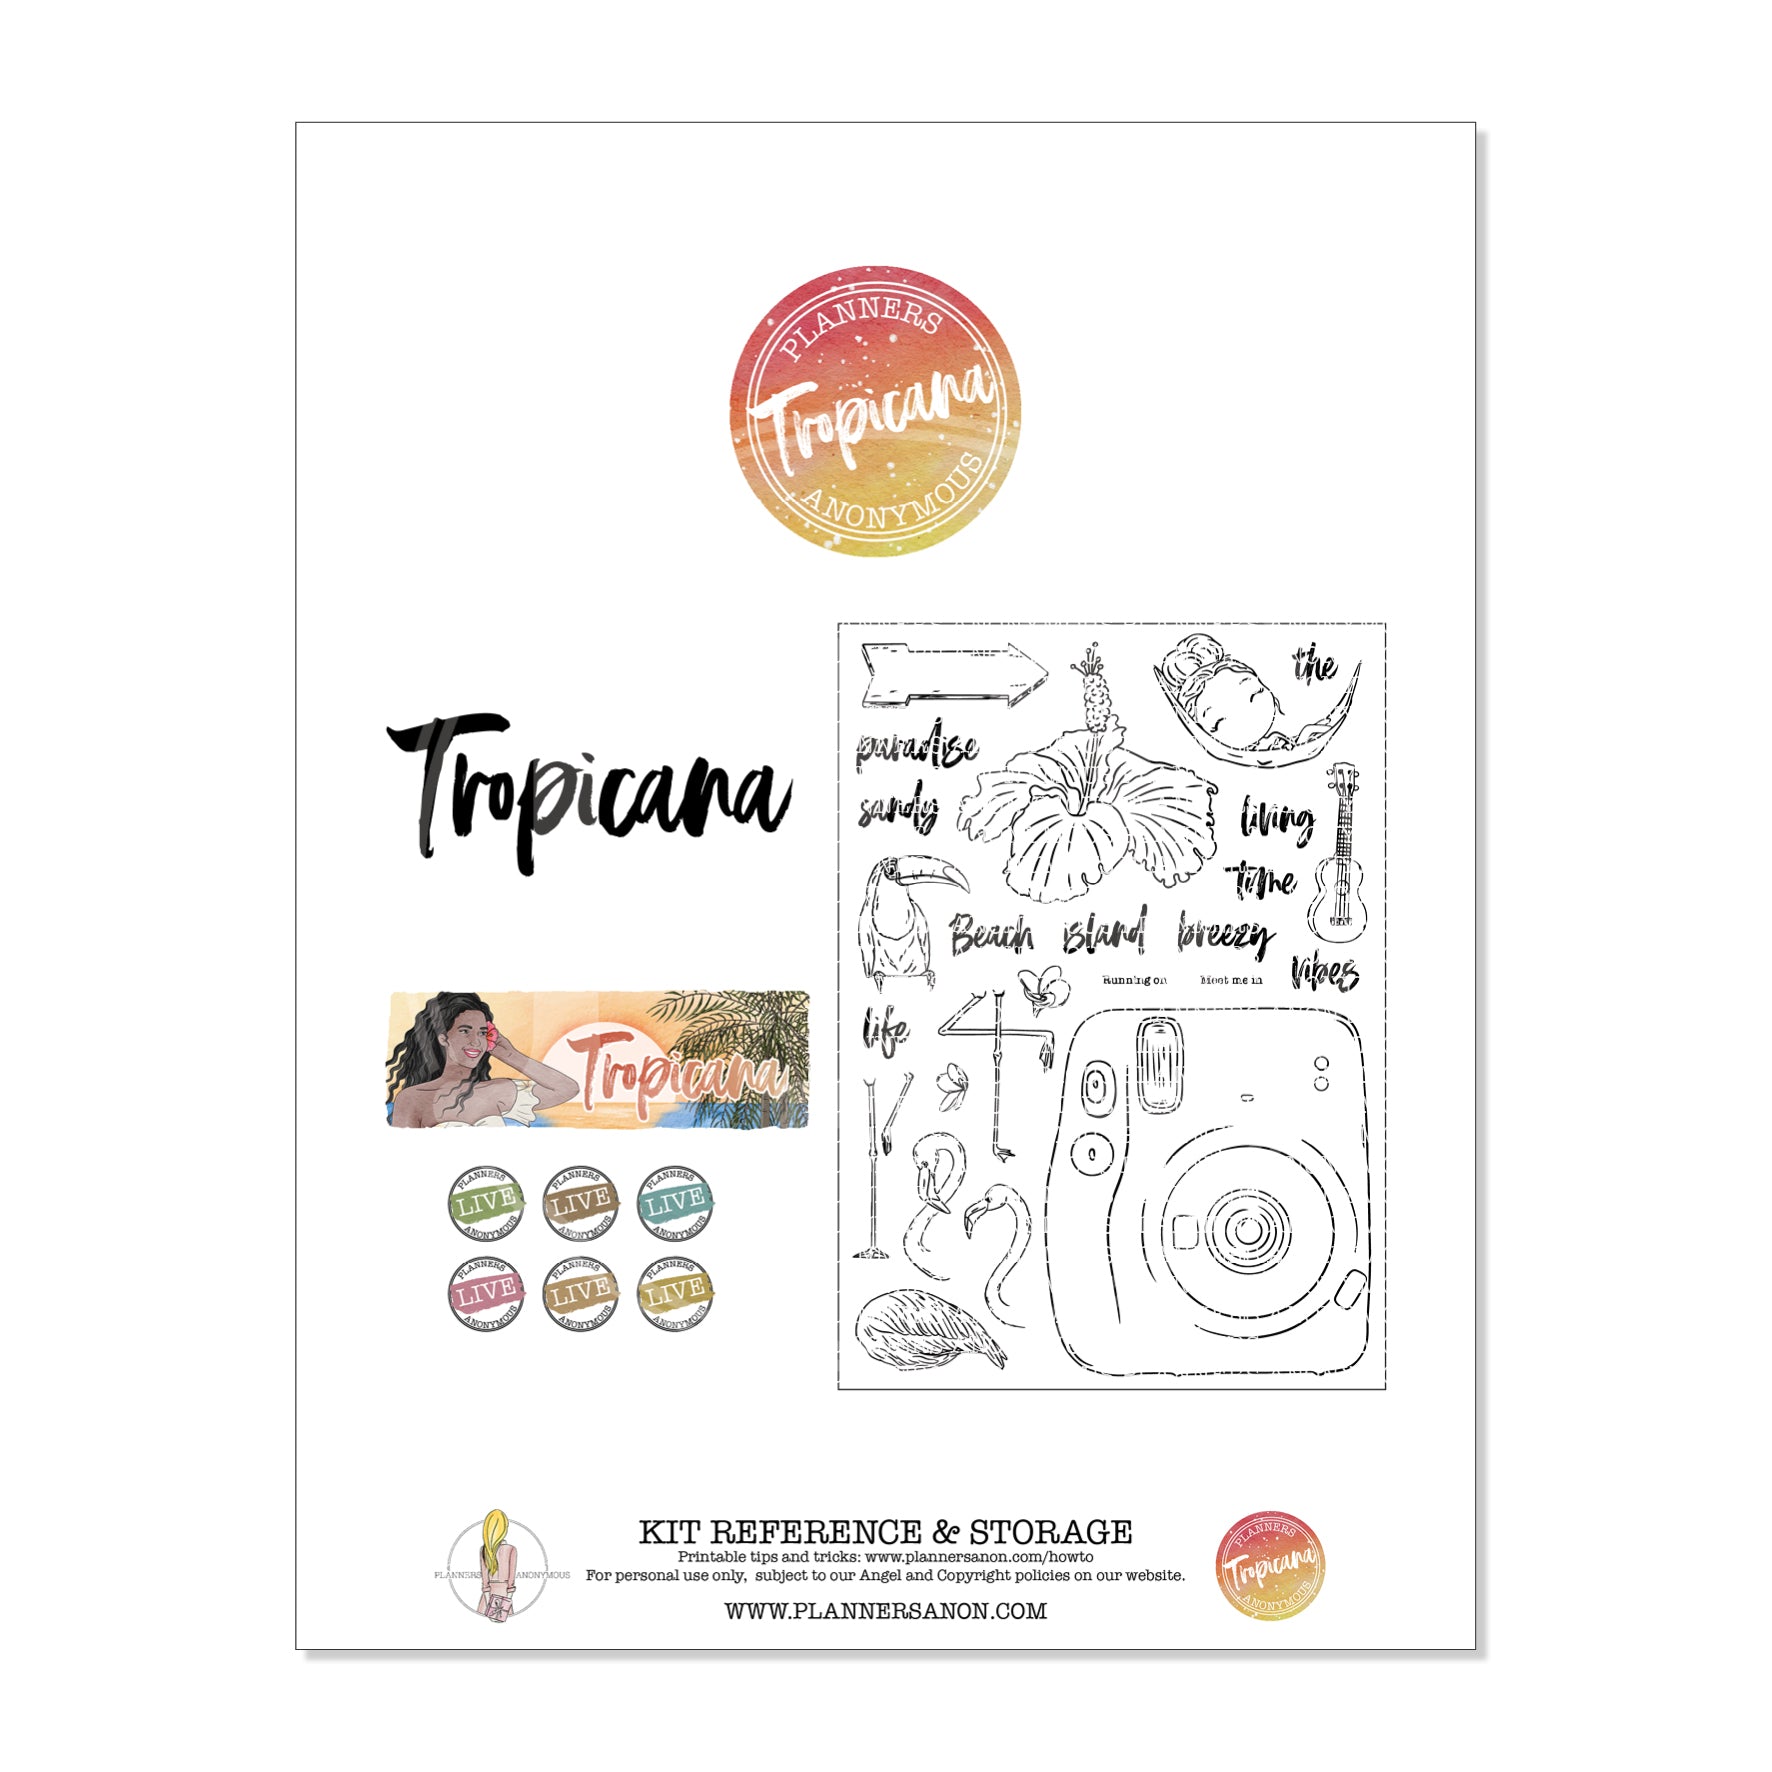 Tropicana Kit Reference Page